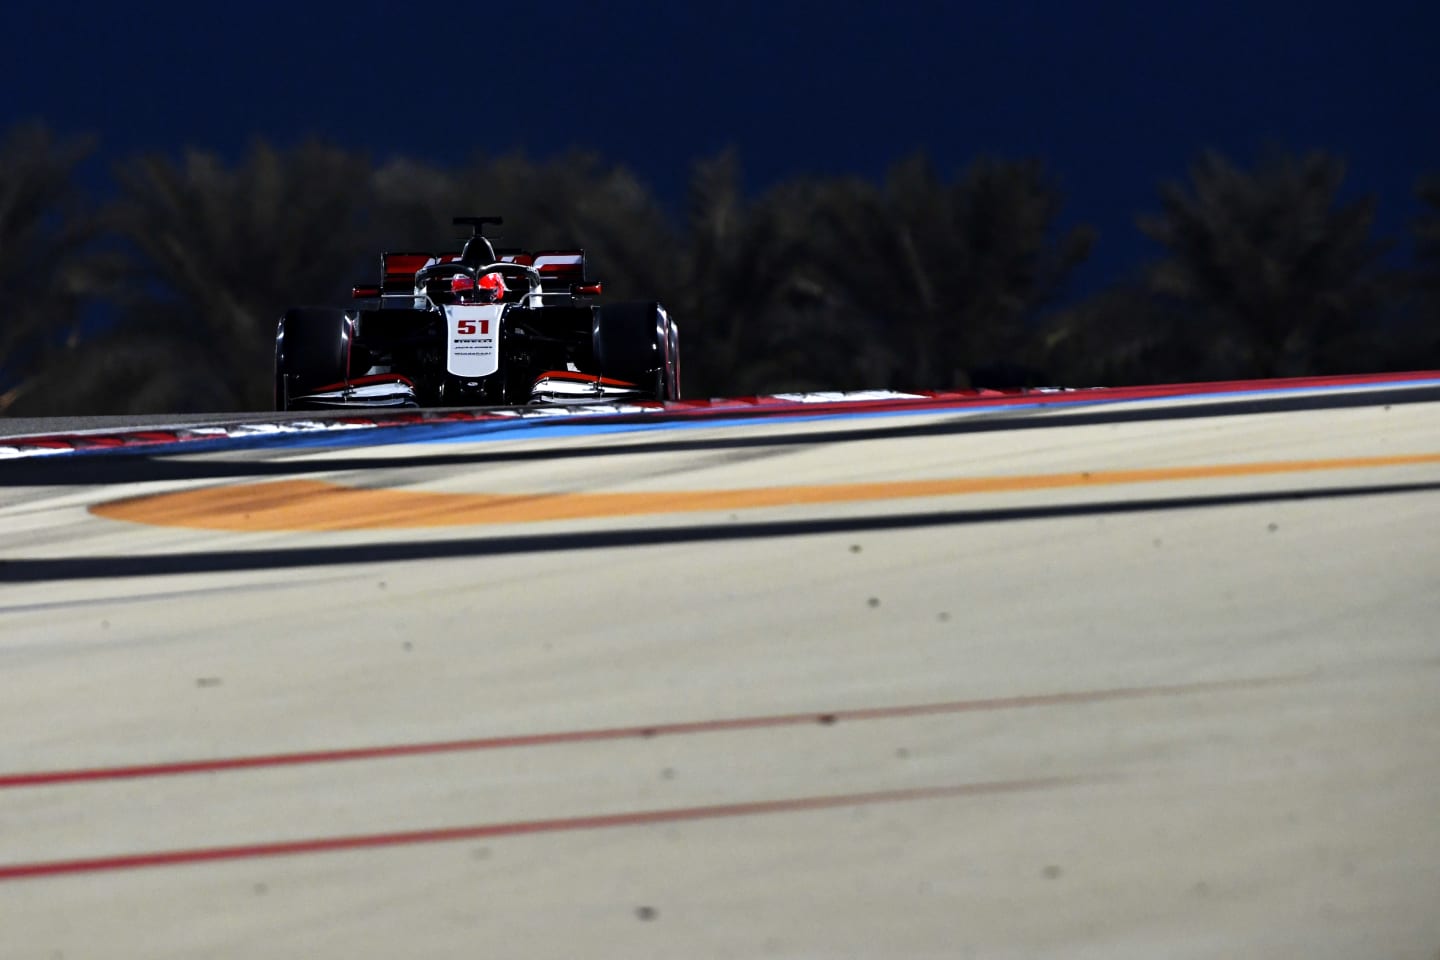 BAHRAIN, BAHRAIN - DECEMBER 05: Pietro Fittipaldi of Brazil driving the (51) Haas F1 Team VF-20 Ferrari during final practice ahead of the F1 Grand Prix of Sakhir at Bahrain International Circuit on December 05, 2020 in Bahrain, Bahrain. (Photo by Rudy Carezzevoli/Getty Images)